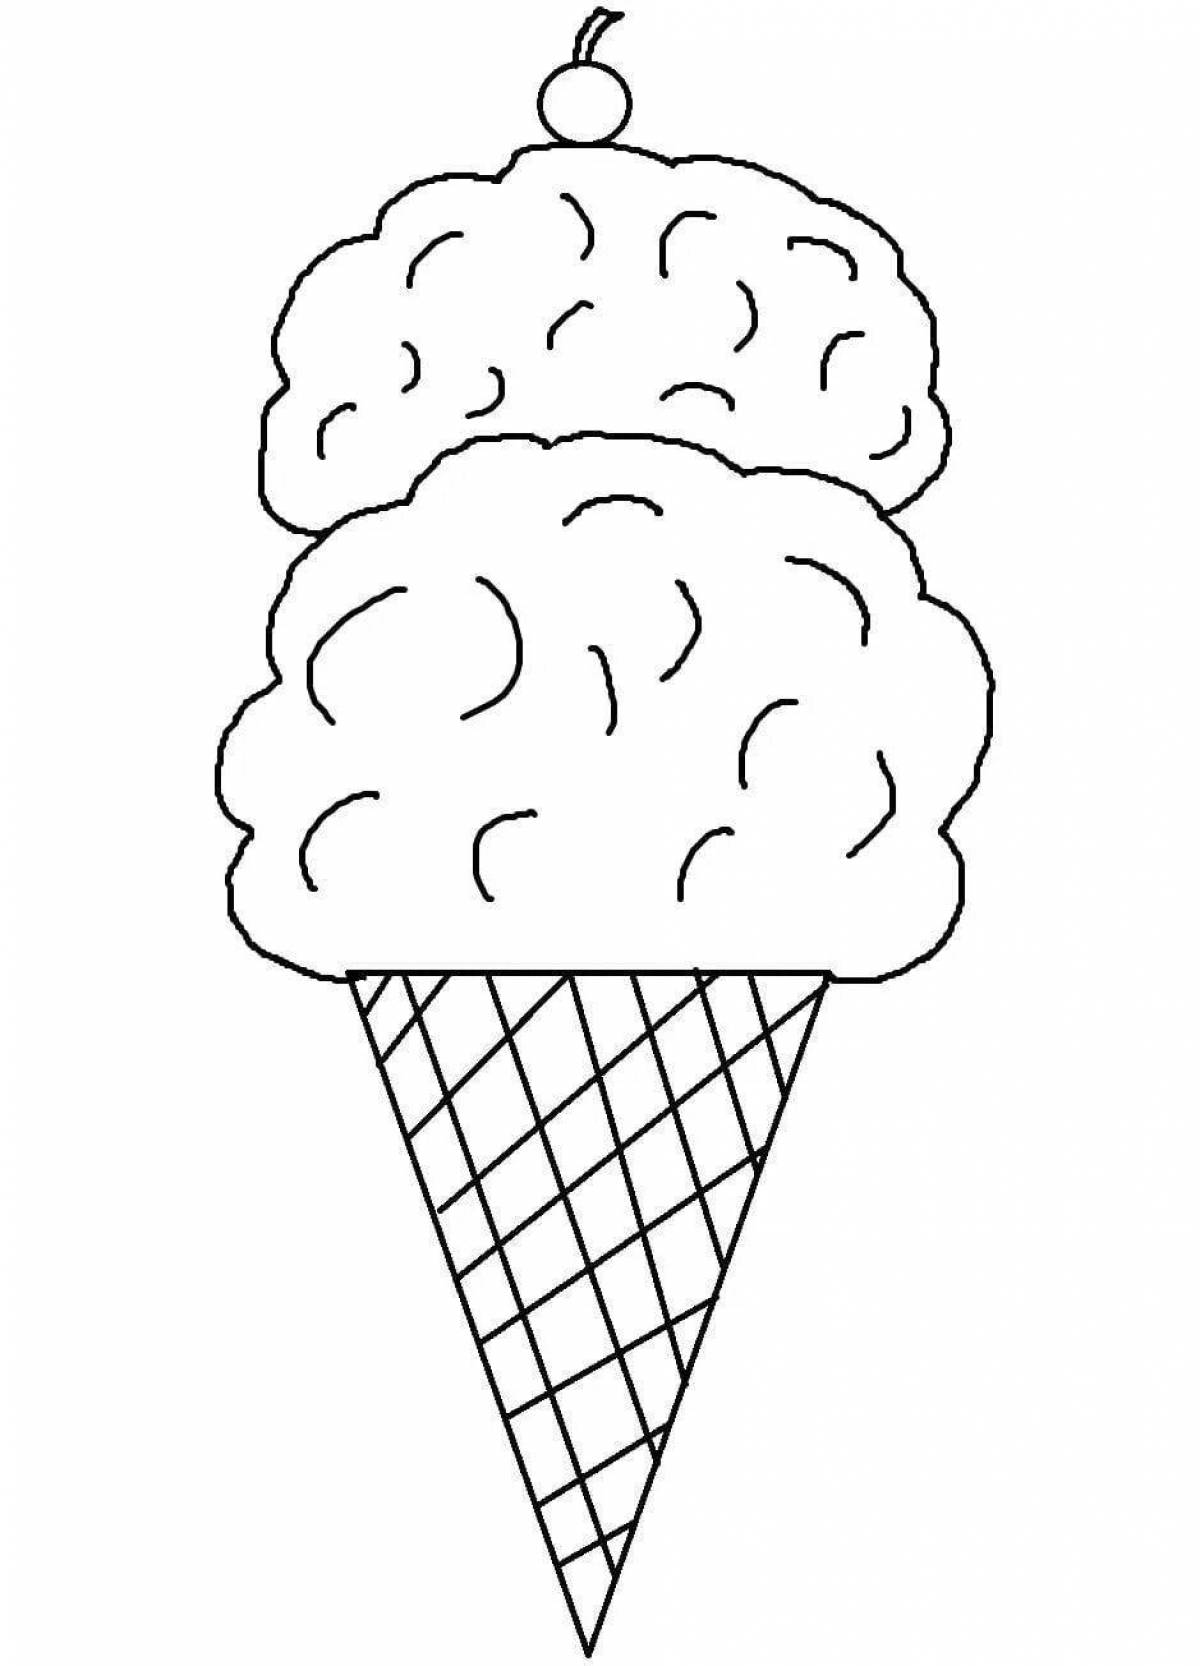 Coloring book happy ice cream for kids